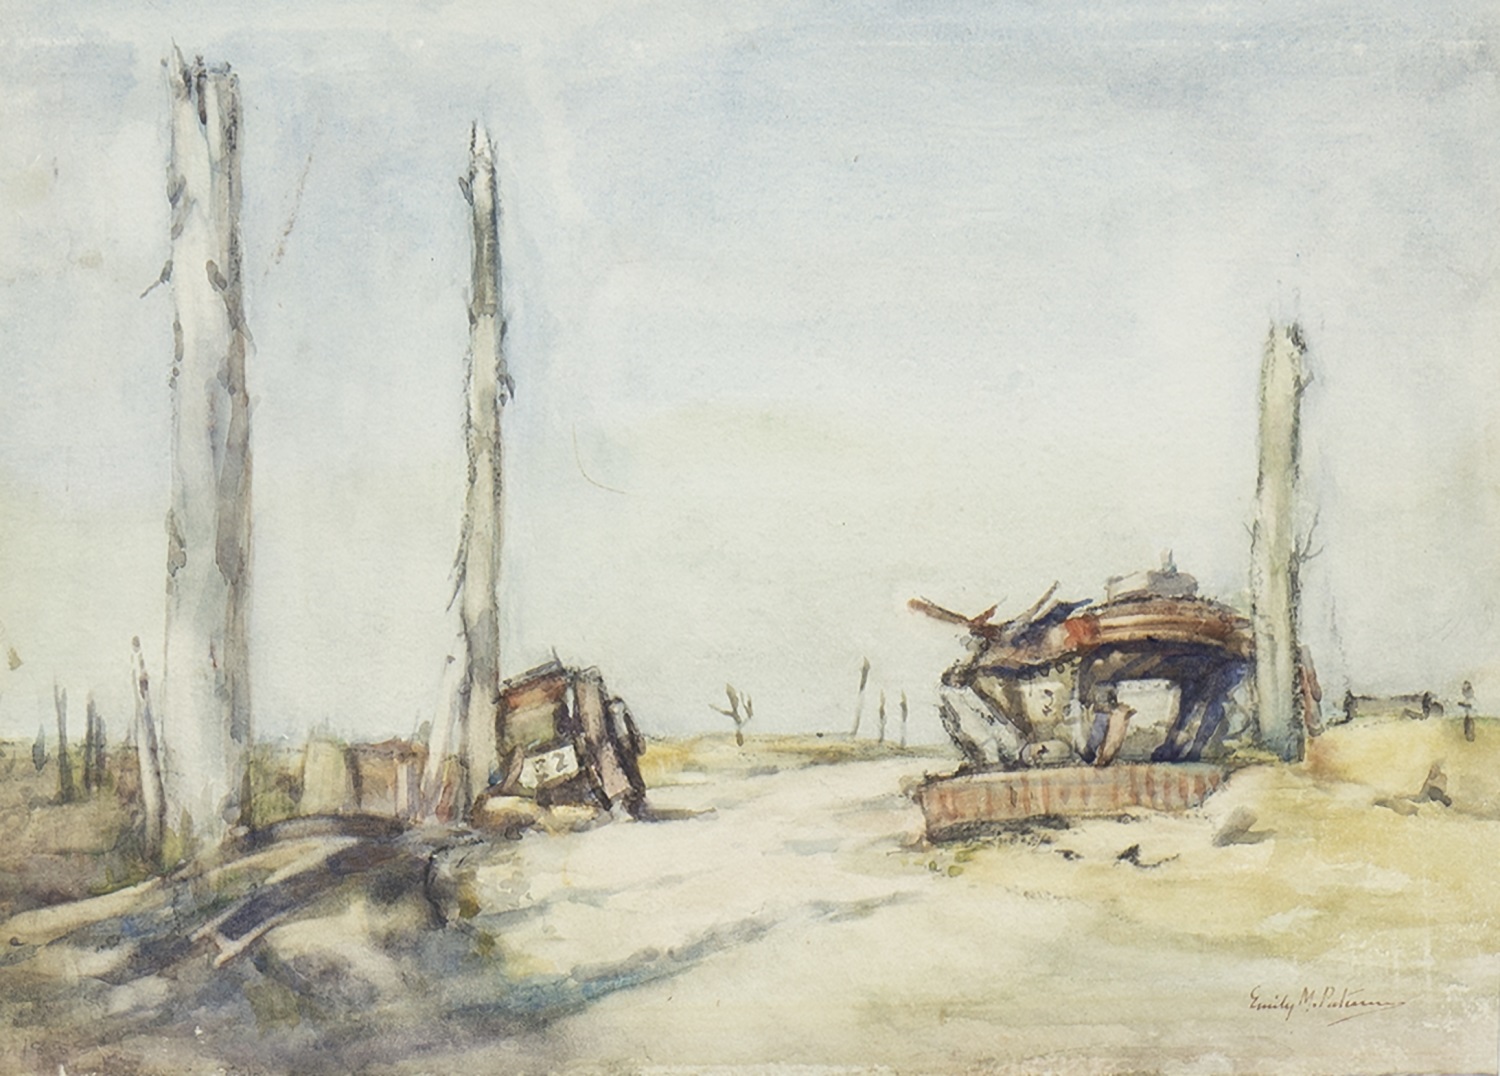 THE DERELICTS AT POELCAPPELLE, A WATERCOLOUR BY EMILY MURRAY PATERSON